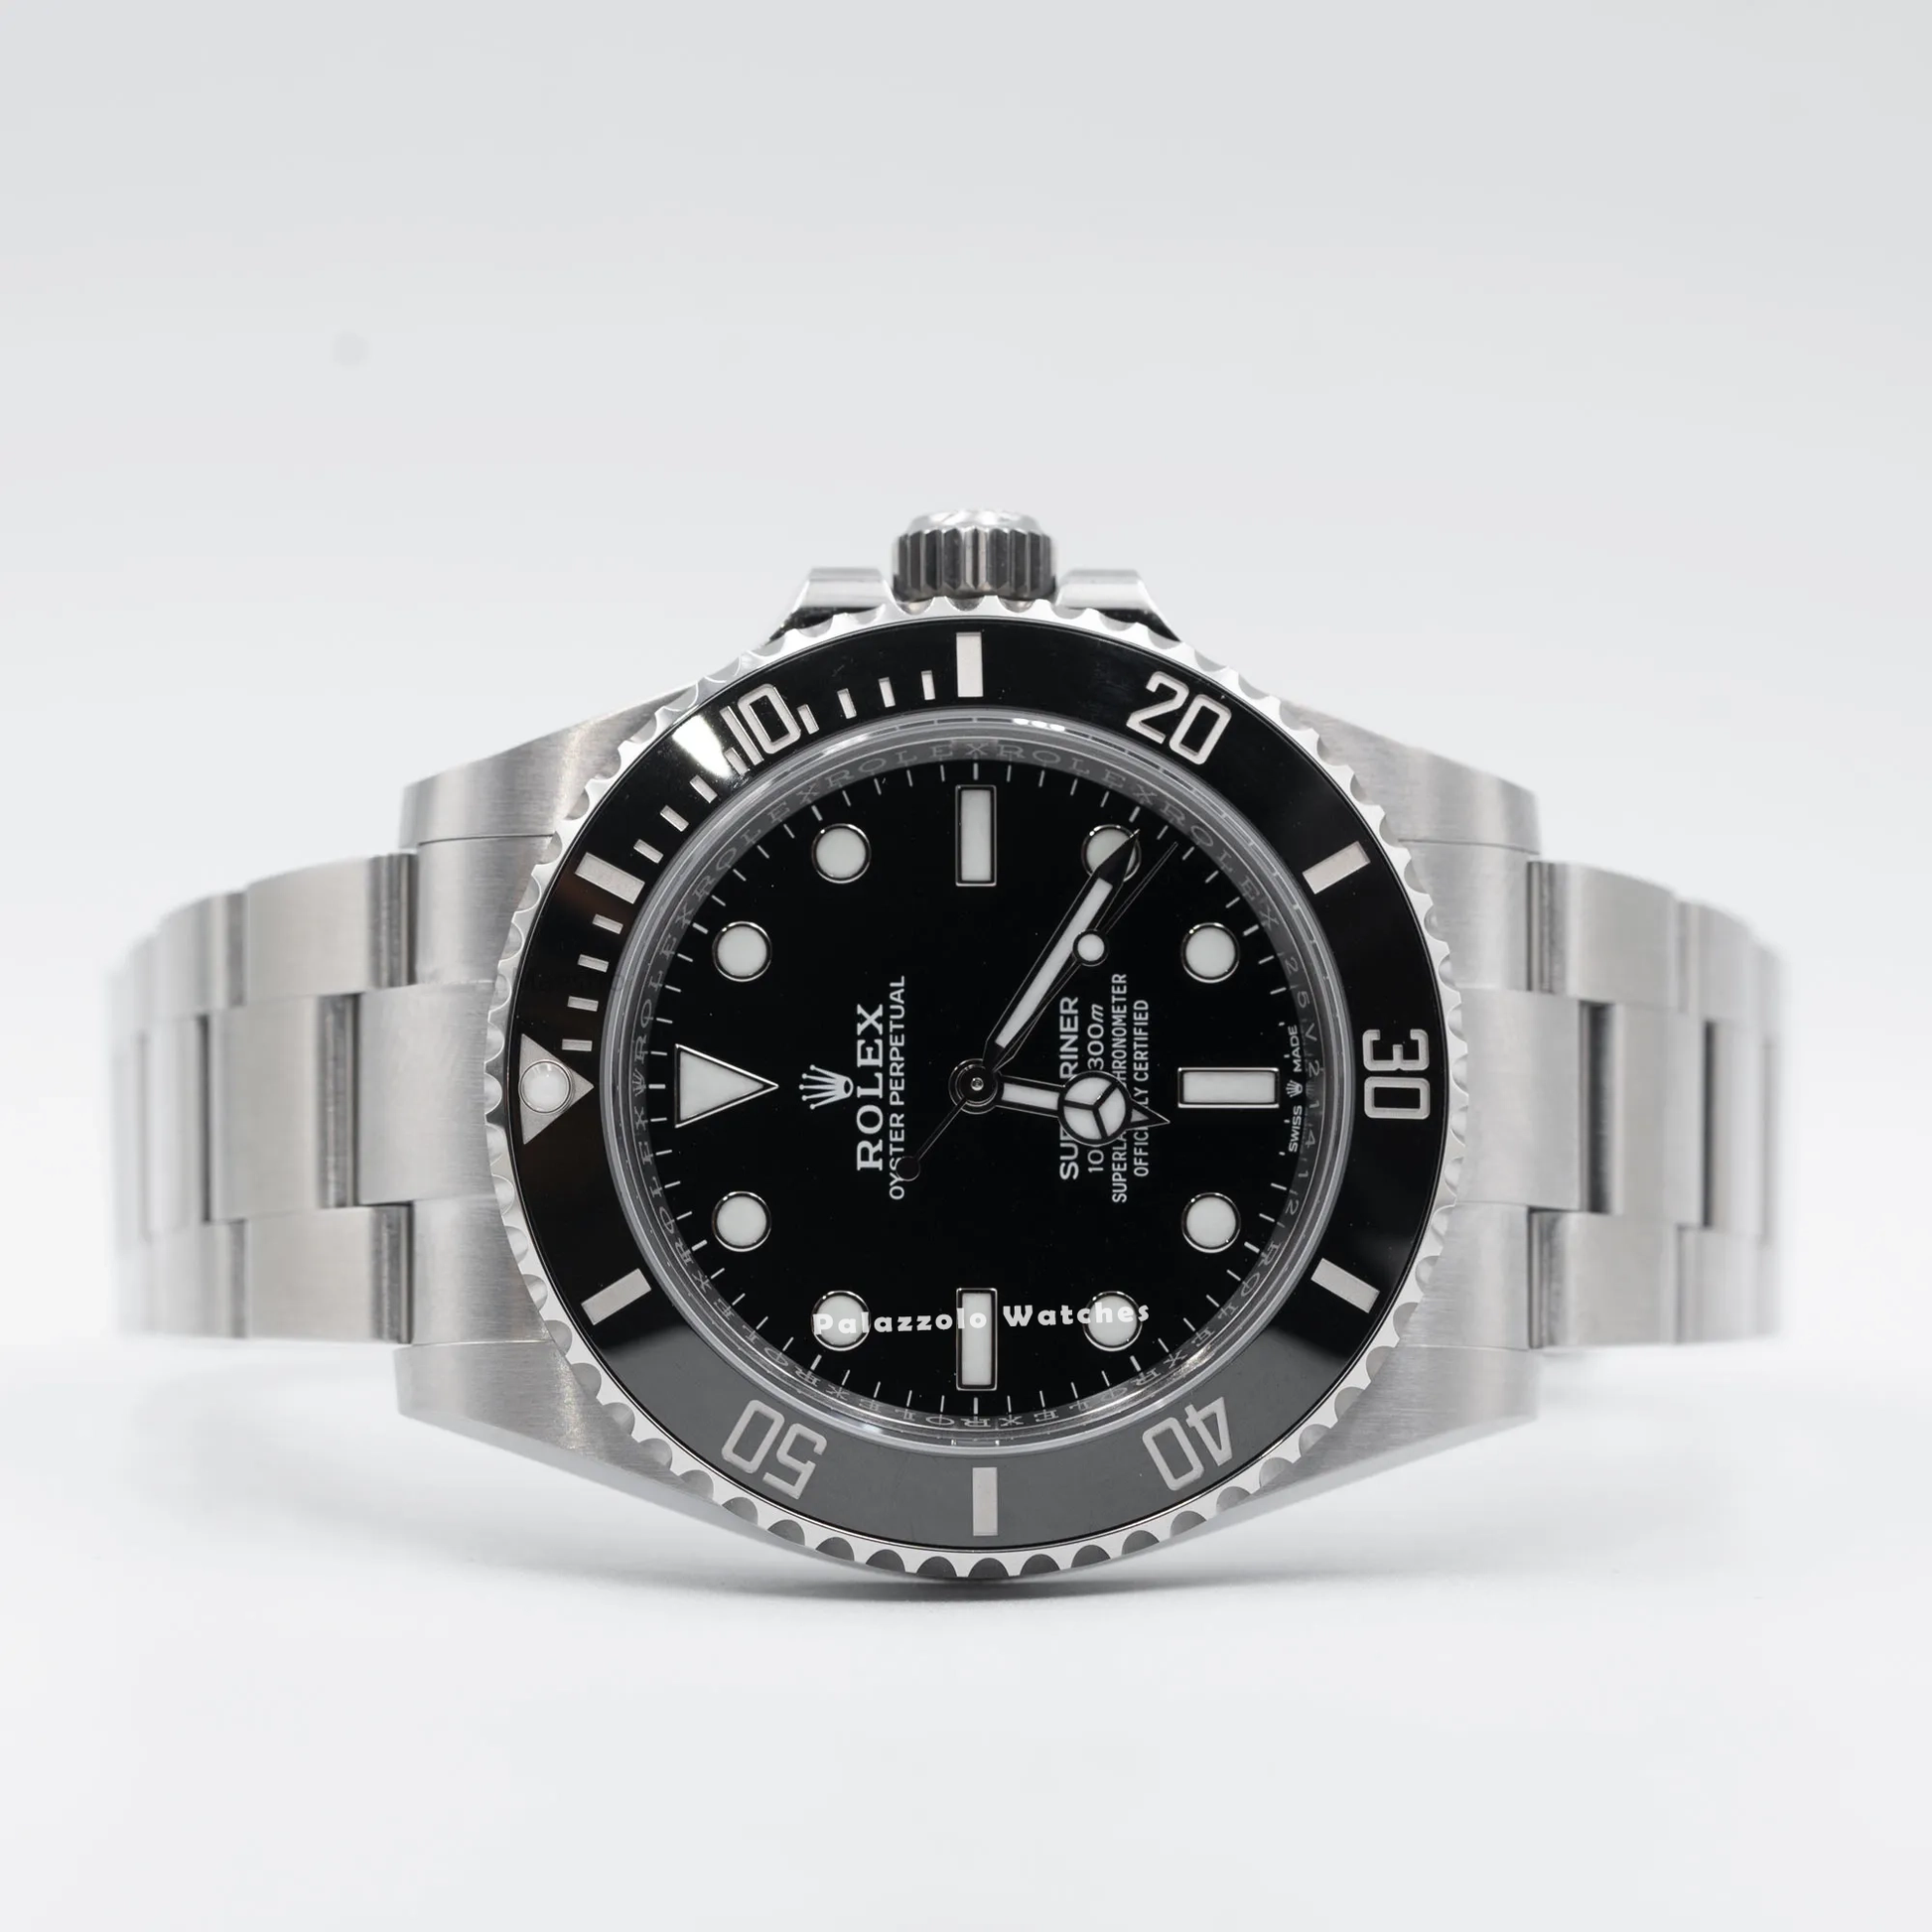 Rolex Submariner No-Date 41mm - Palazzolo Watches